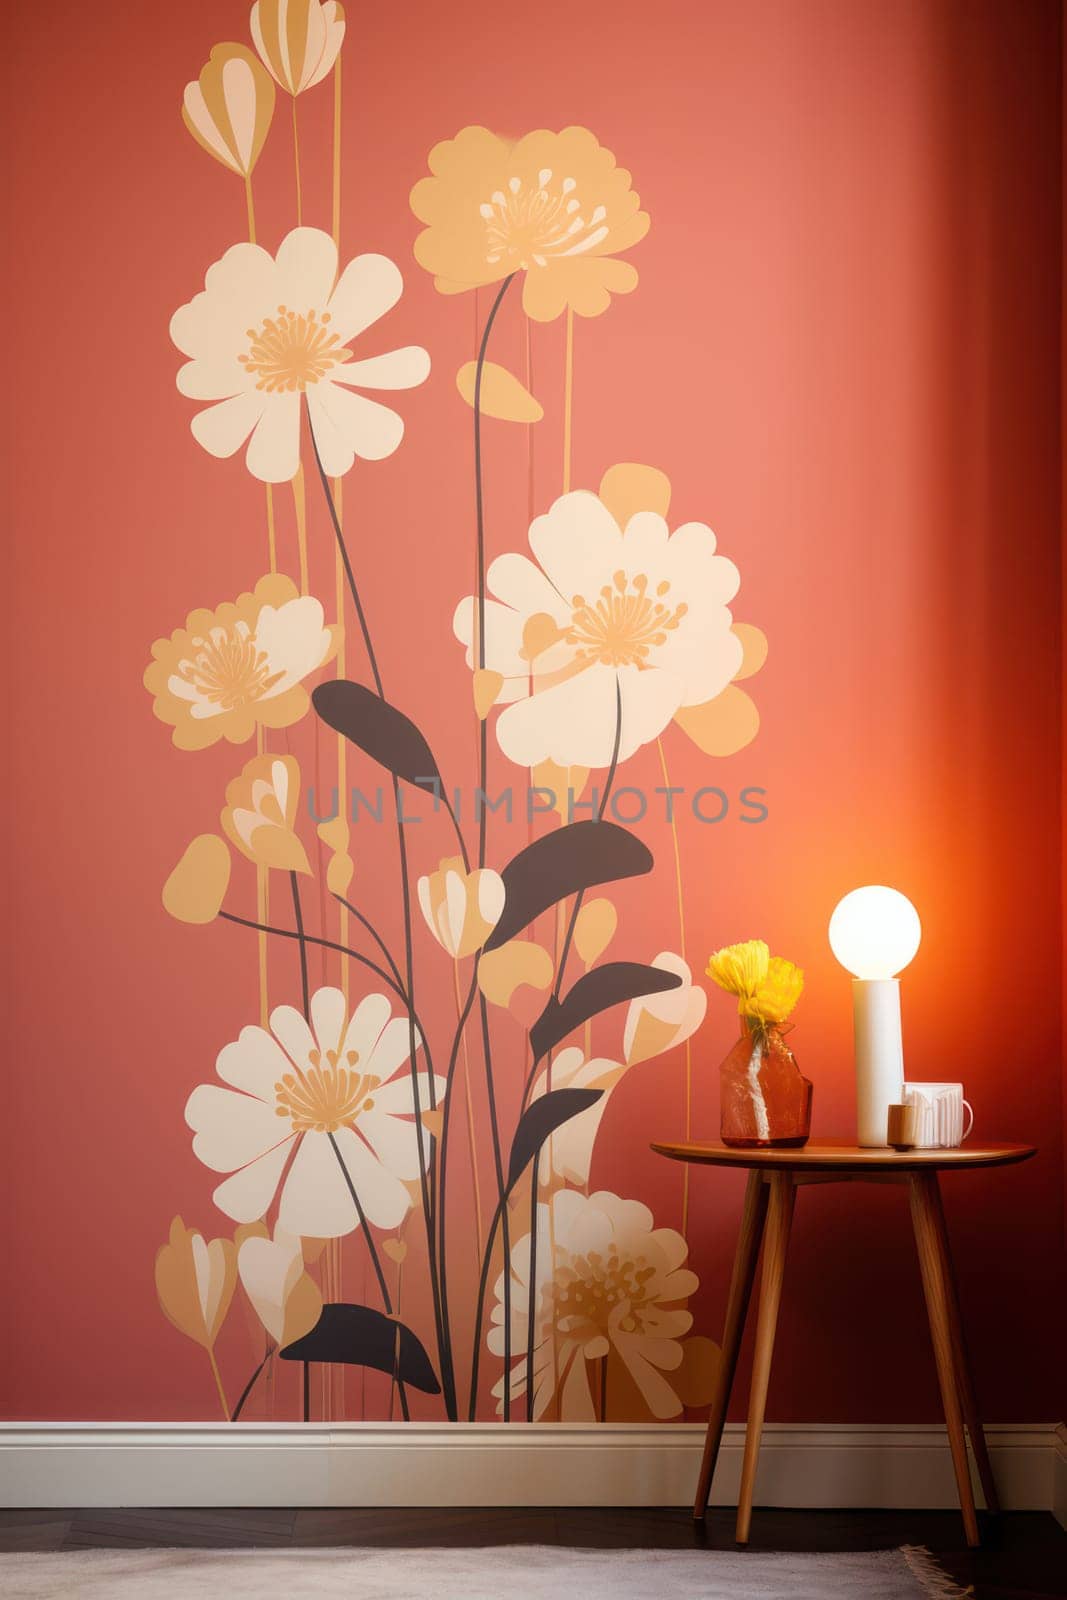 Decorative Floral Vase: A Blooming Composition of White and Pink Flowers on a Wooden Table in a Modern Still Life by Vichizh